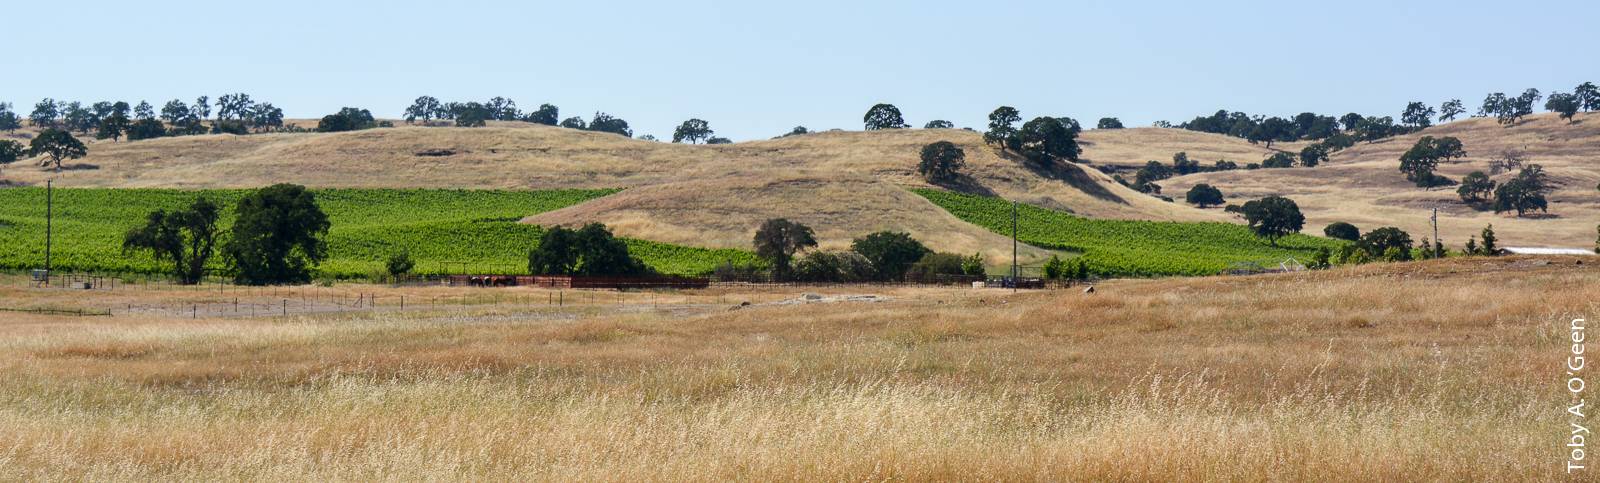 The undulating agricultural land found along many valley margins in California is poorly suited to groundwater banking because application of floodwater or waste water would be difficult to apply at these sites, which are typically drip irrigated.